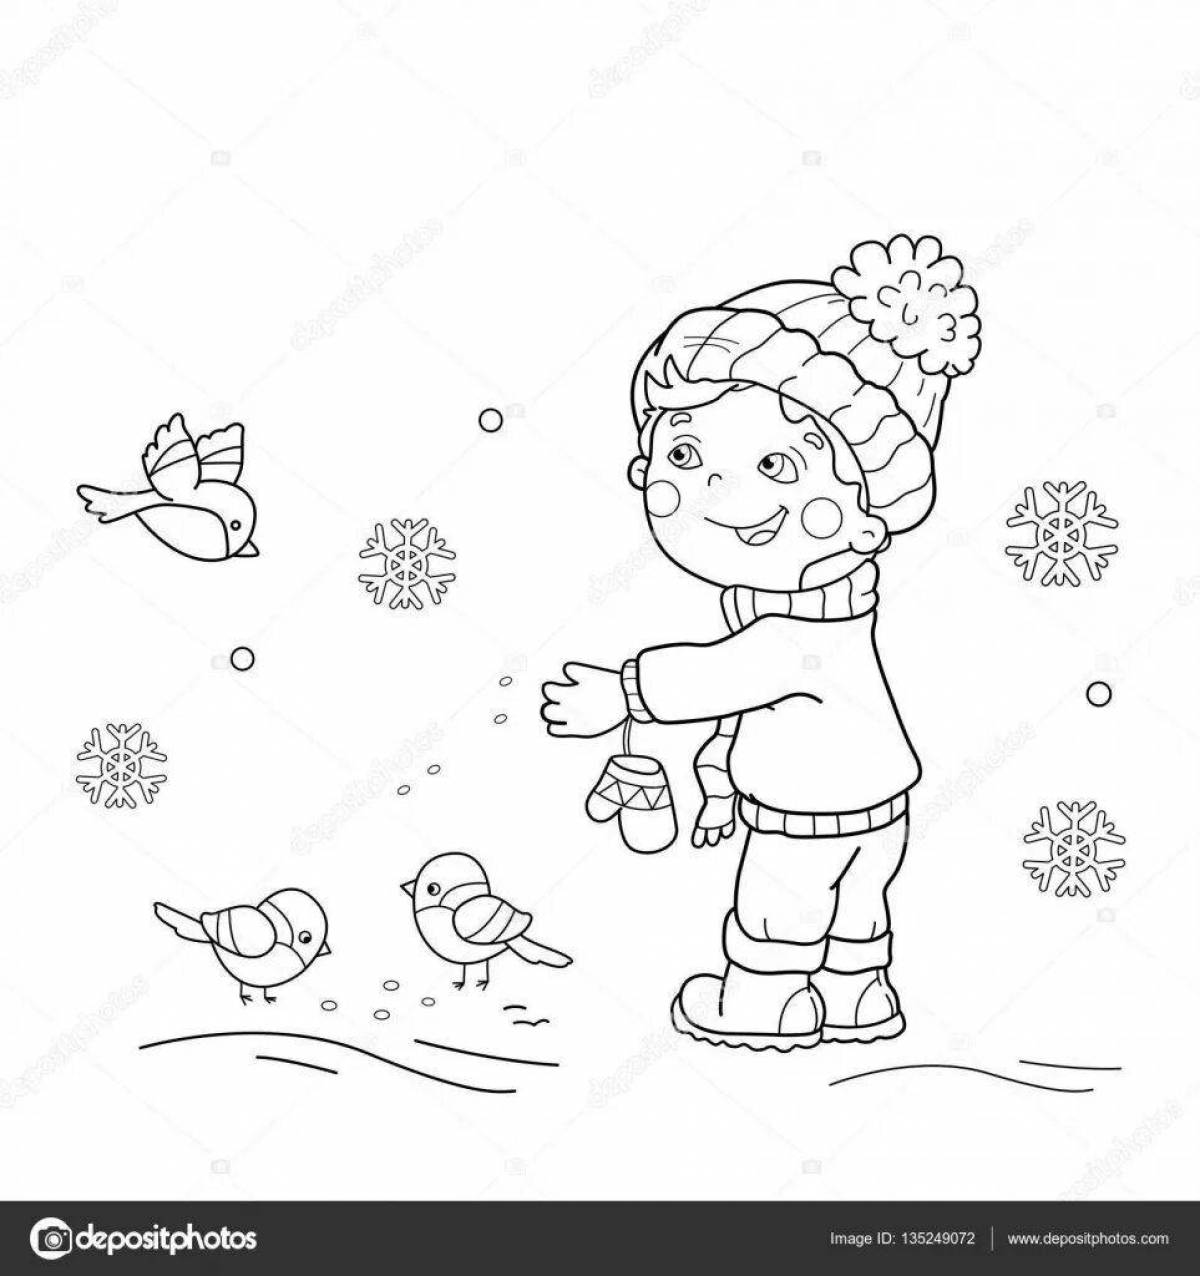 Great to feed the birds in winter for children